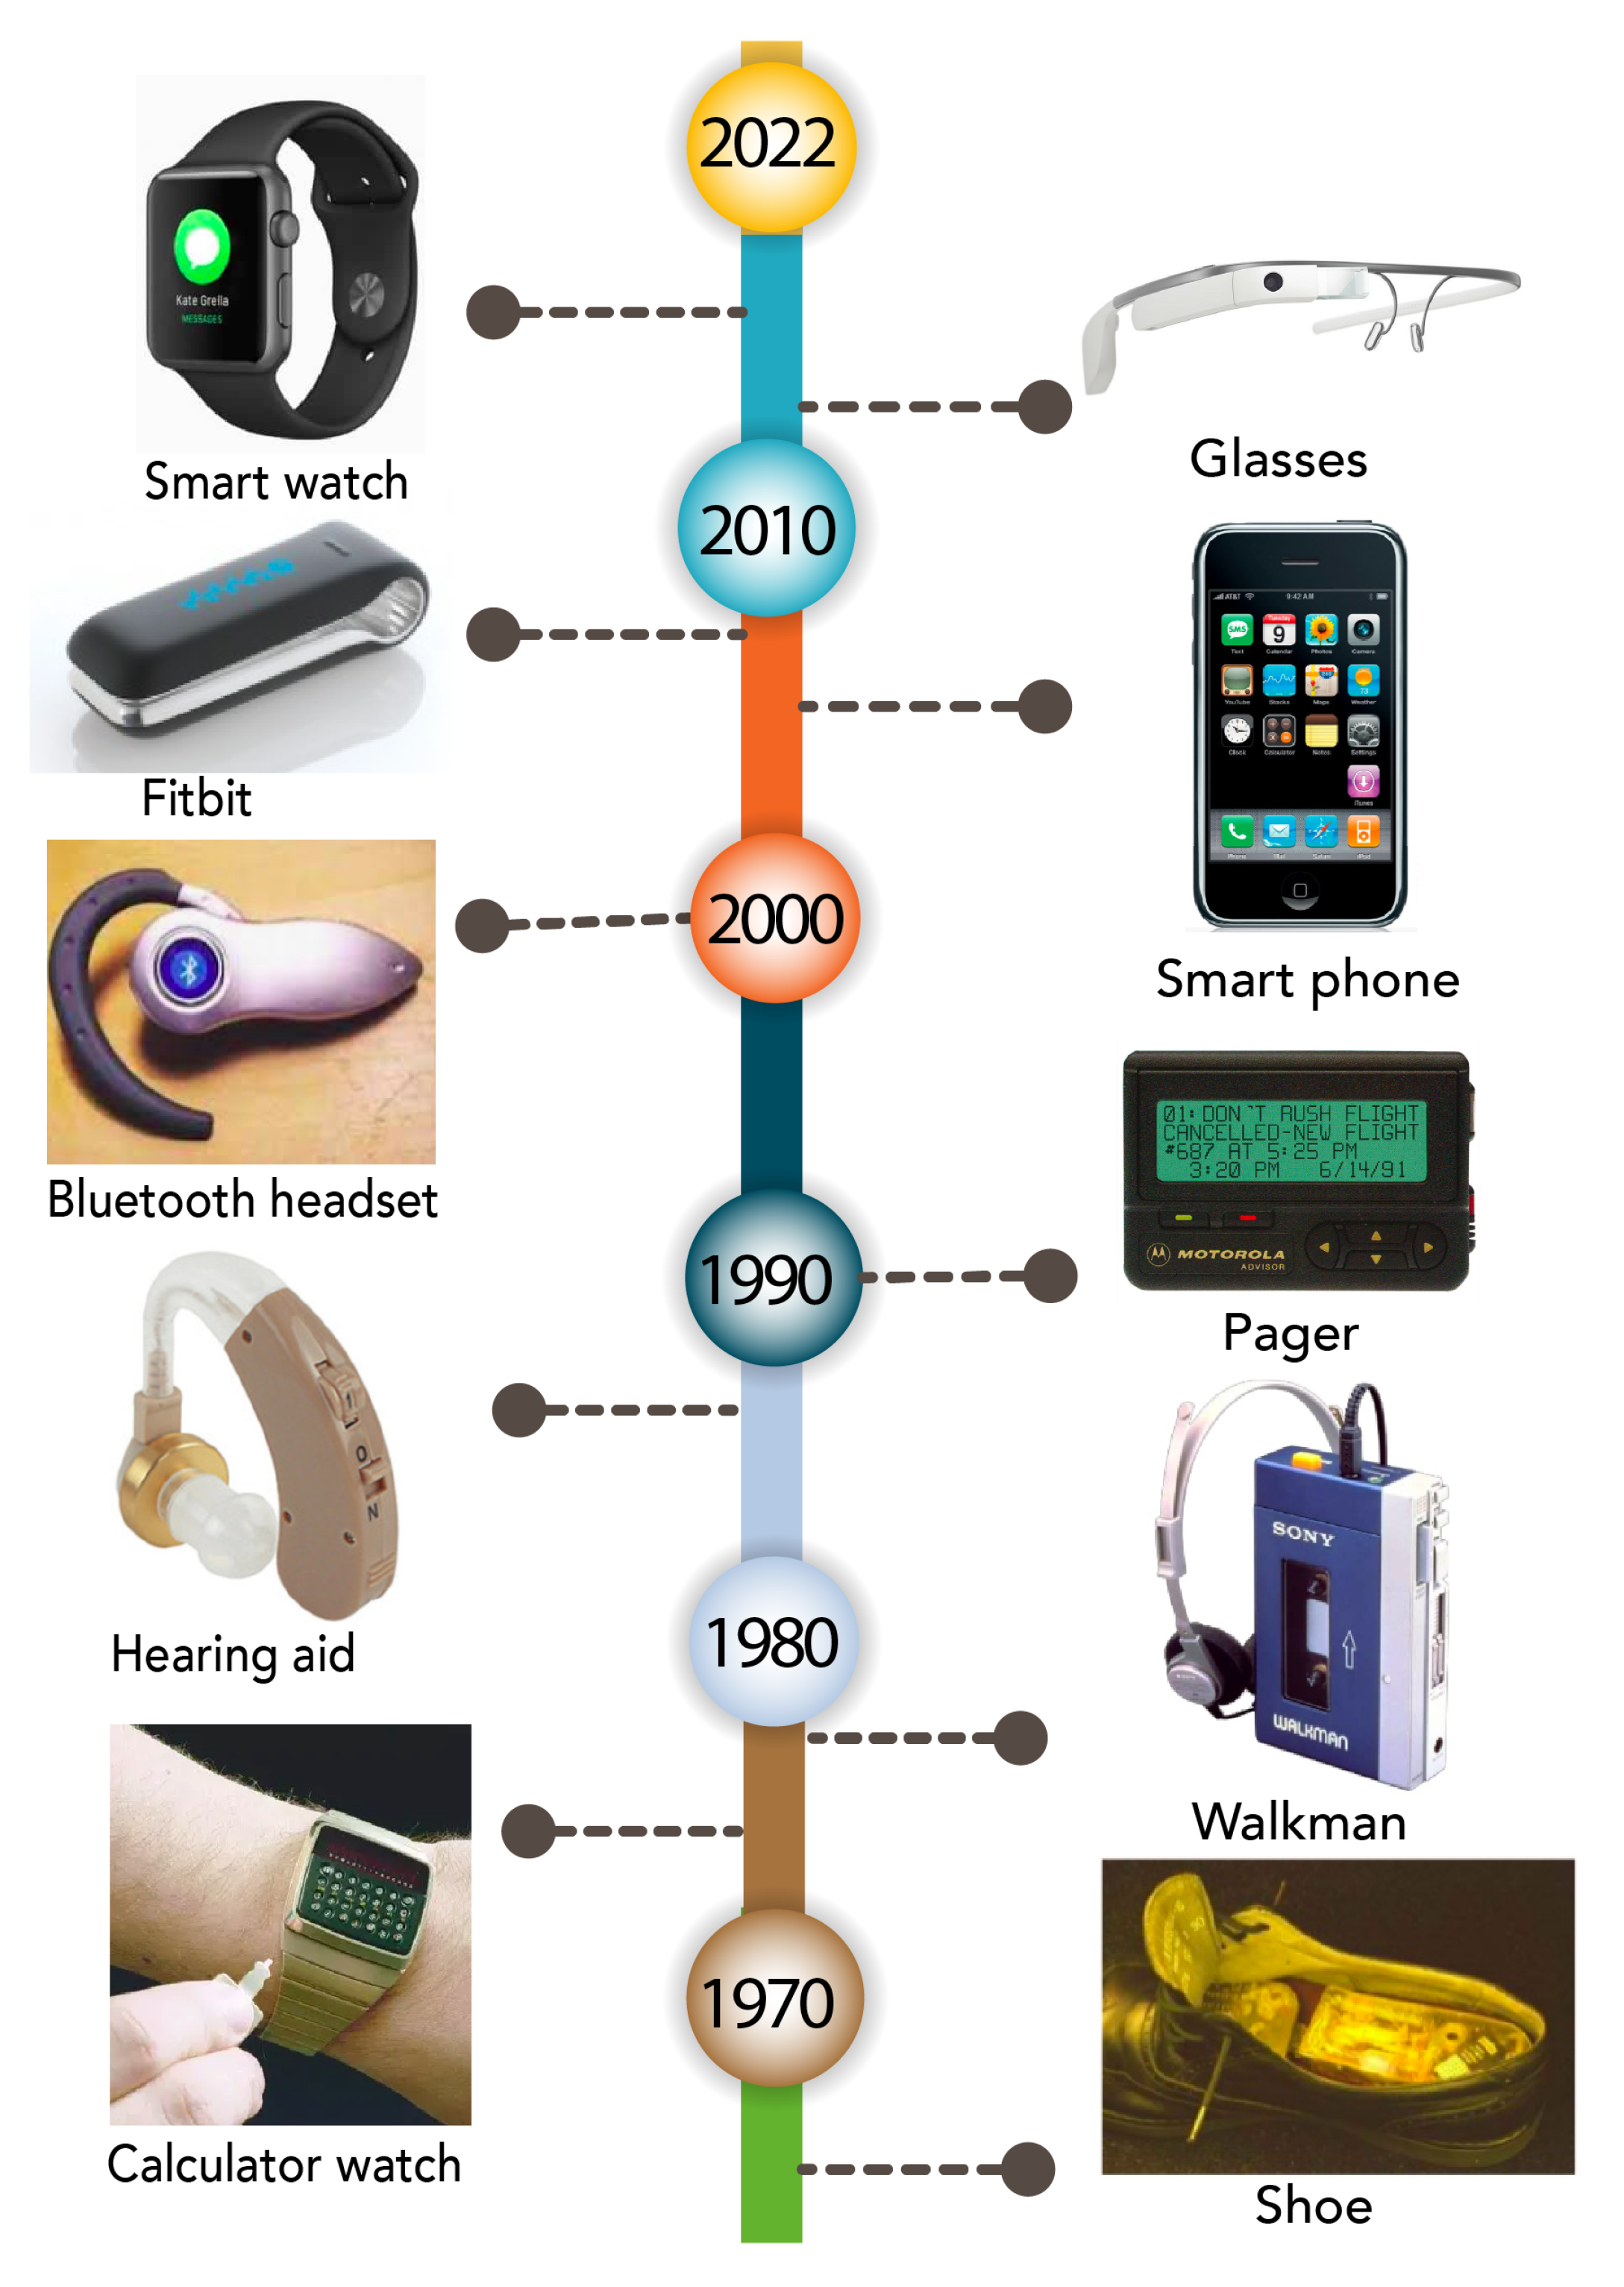 Wearable computing for emotional support